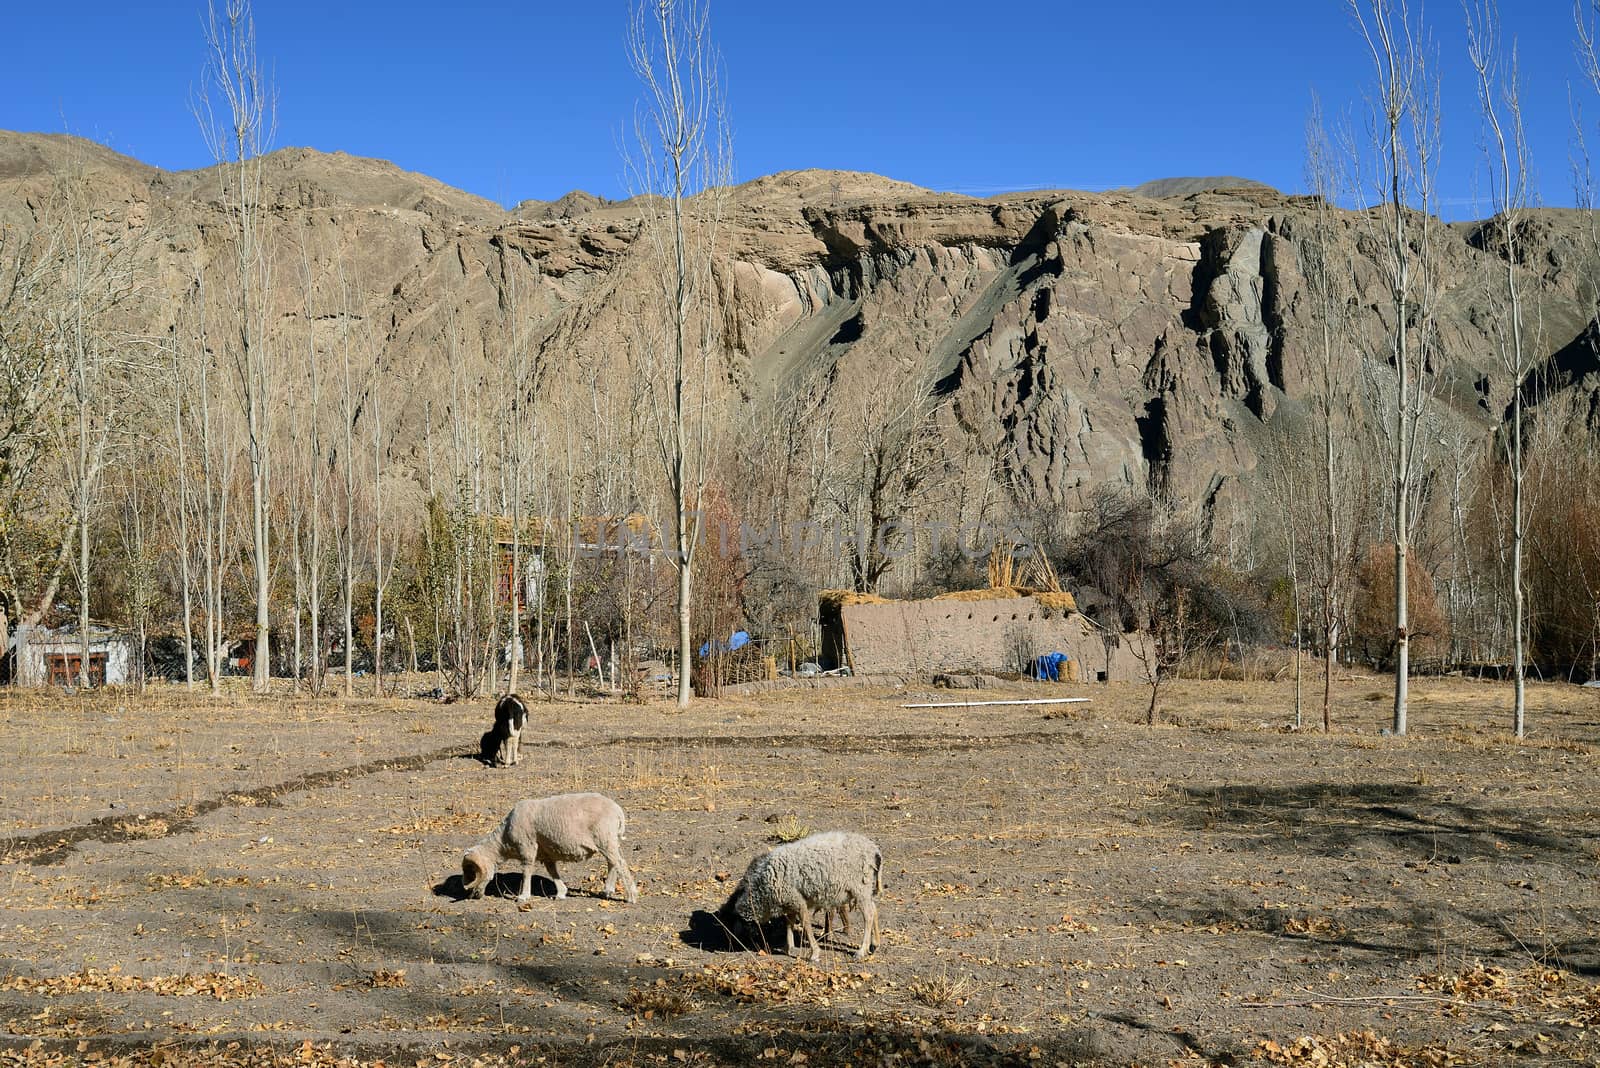 Sheep surrounding with mountain in Ladakh, India by think4photop